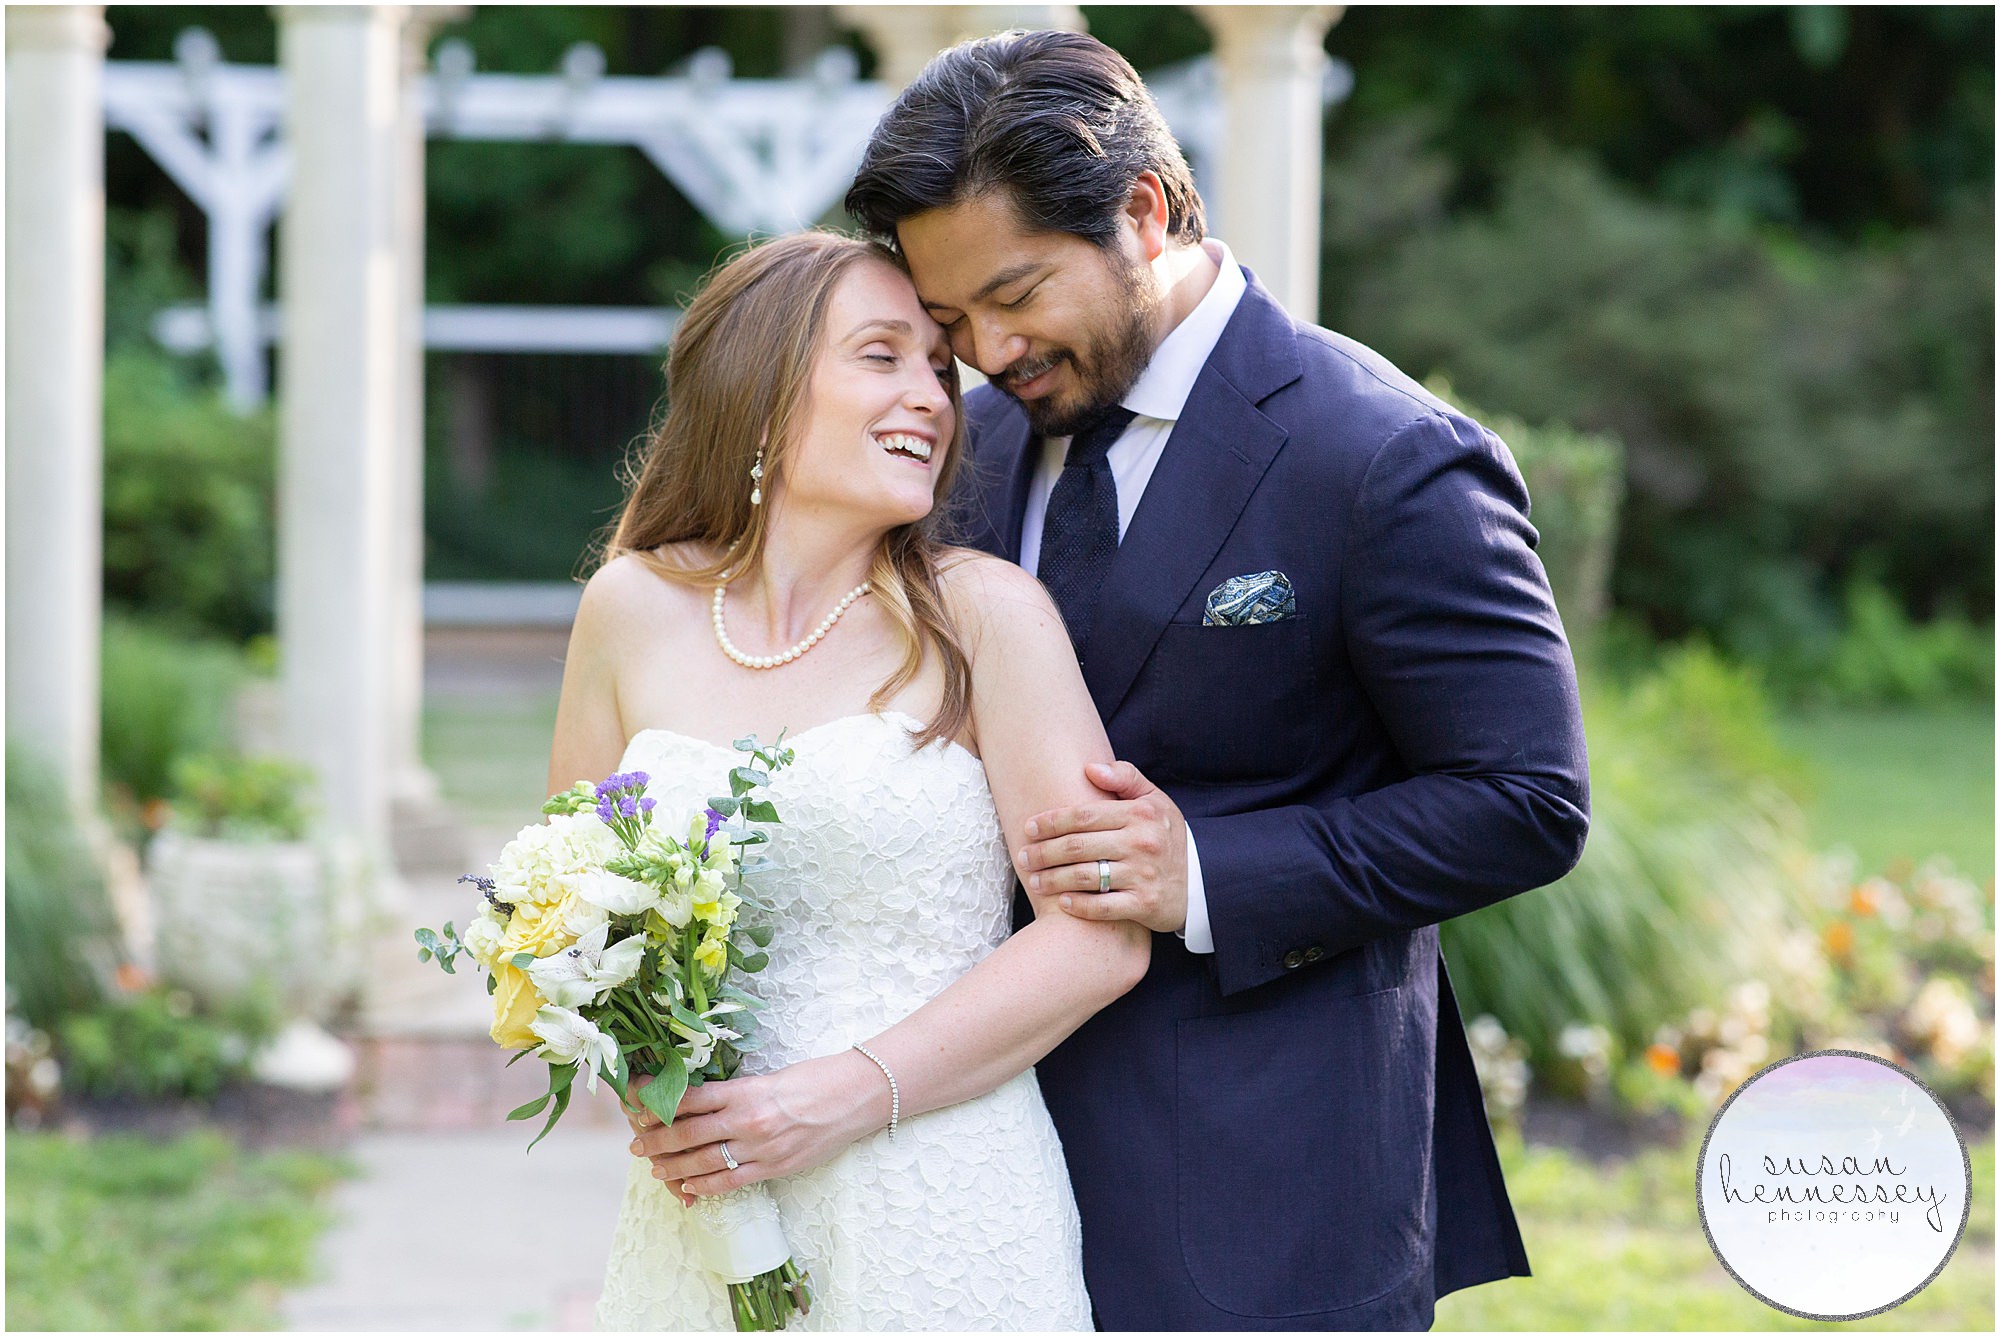 A bride and groom have a low key wedding at Sayen Gardens